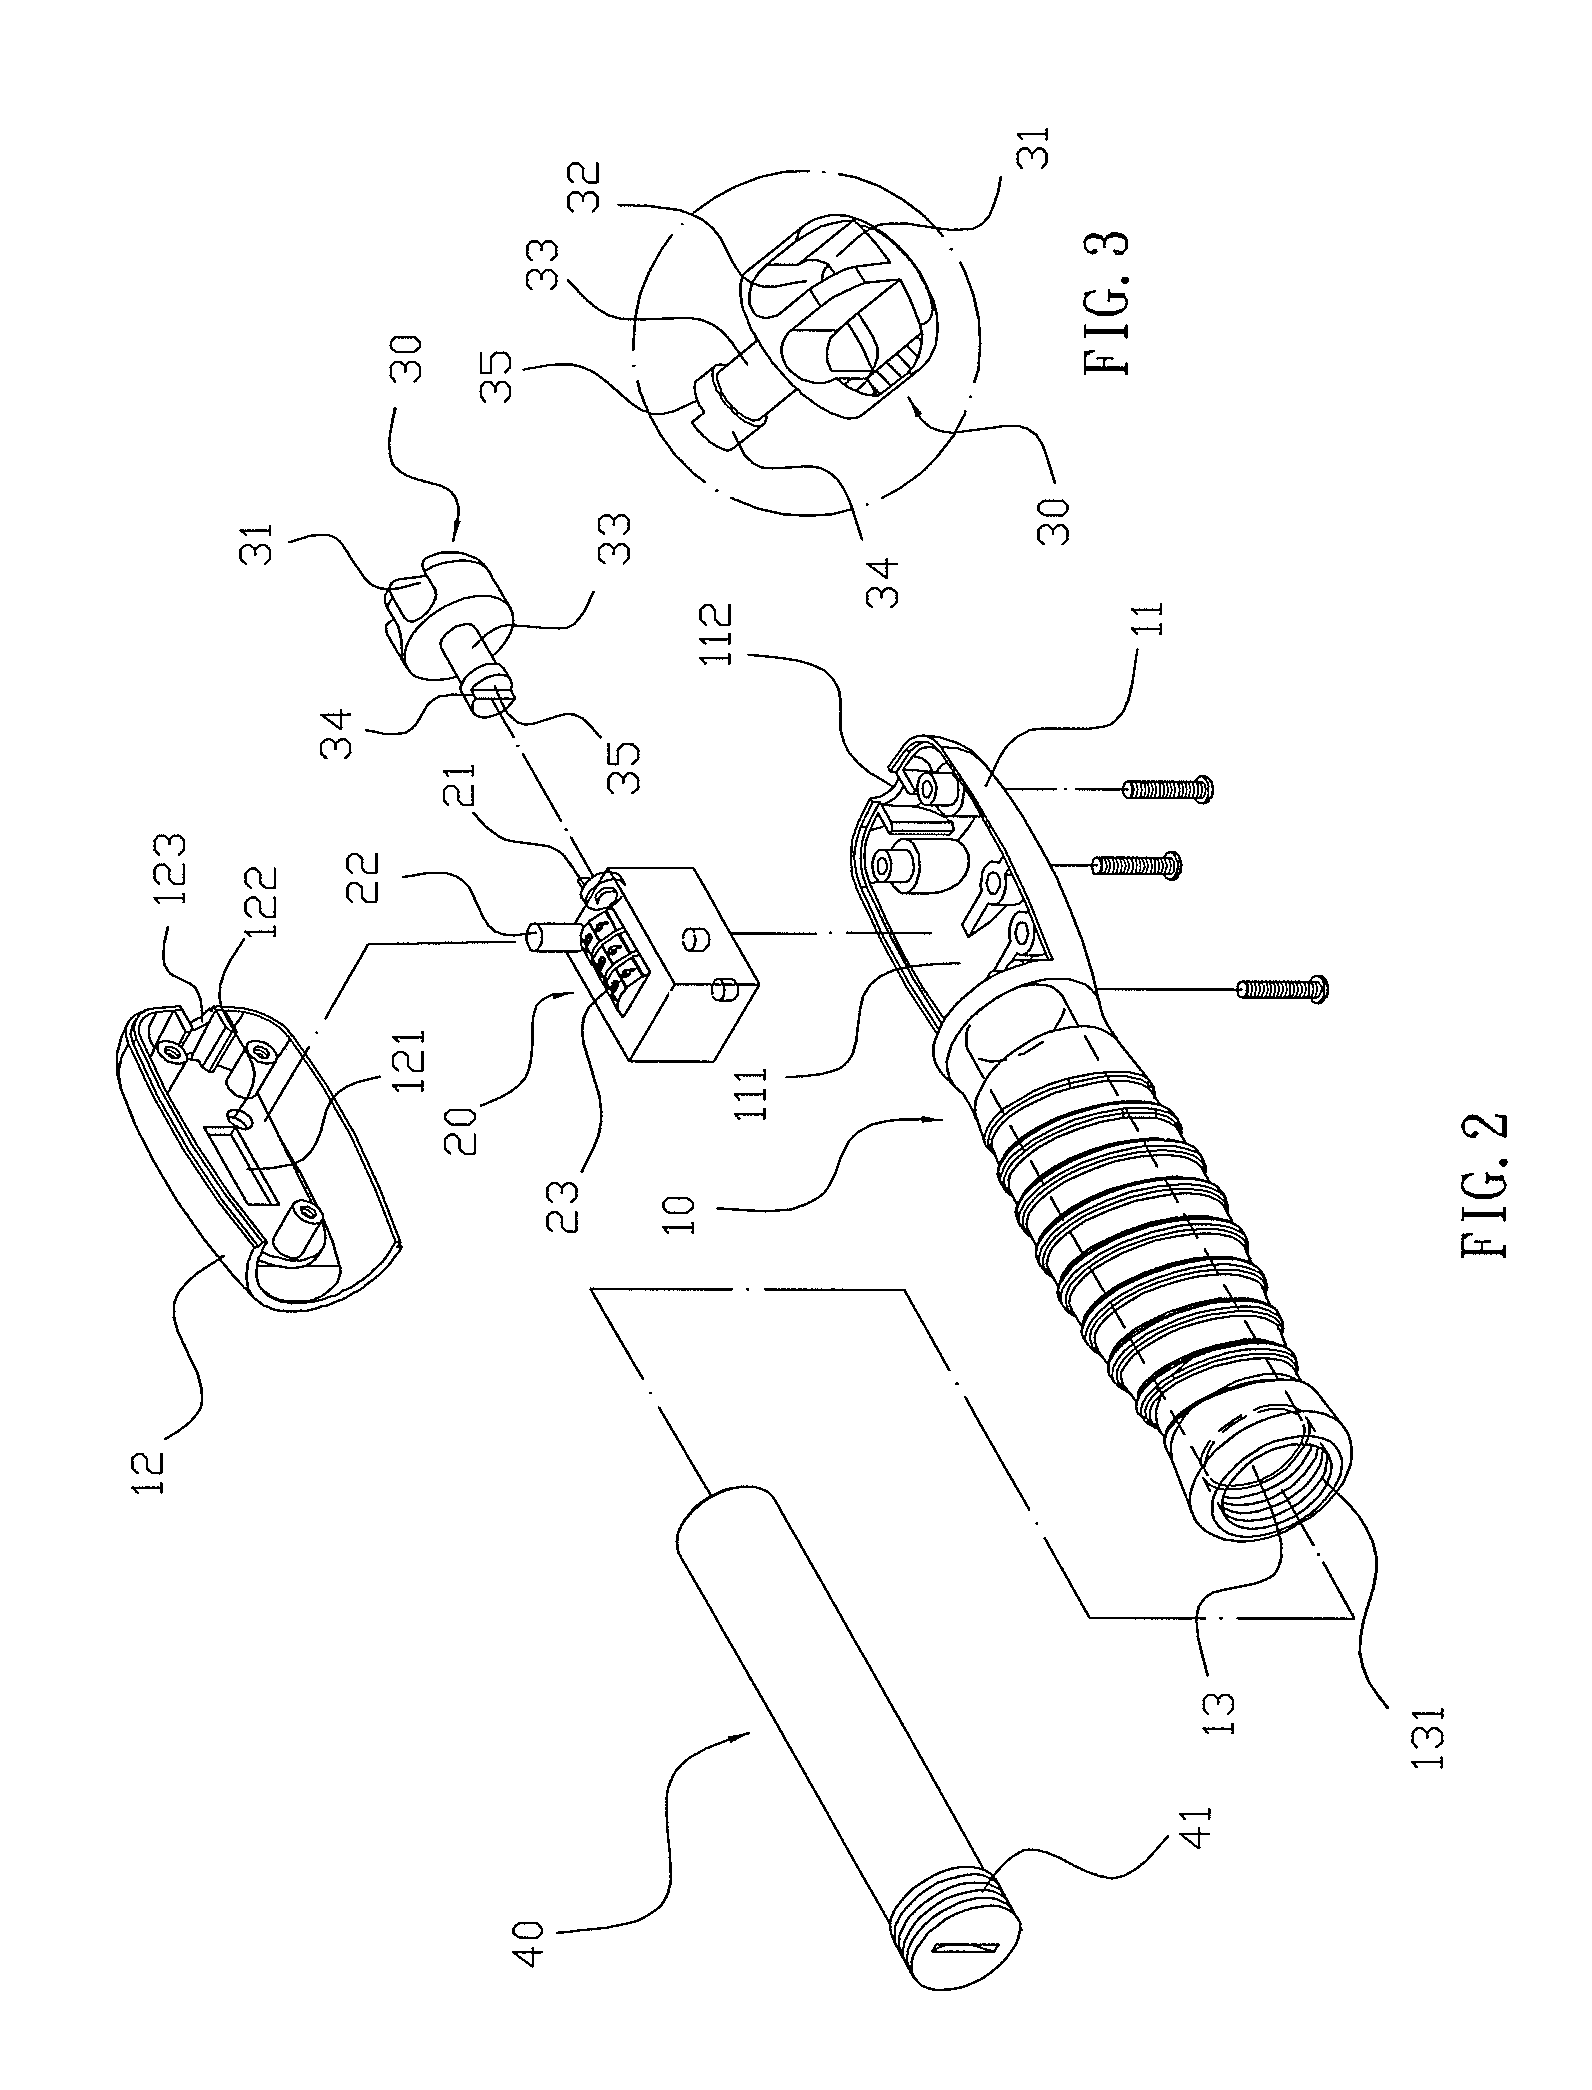 Jump rope grip assembly having adjustable weight and number counting function